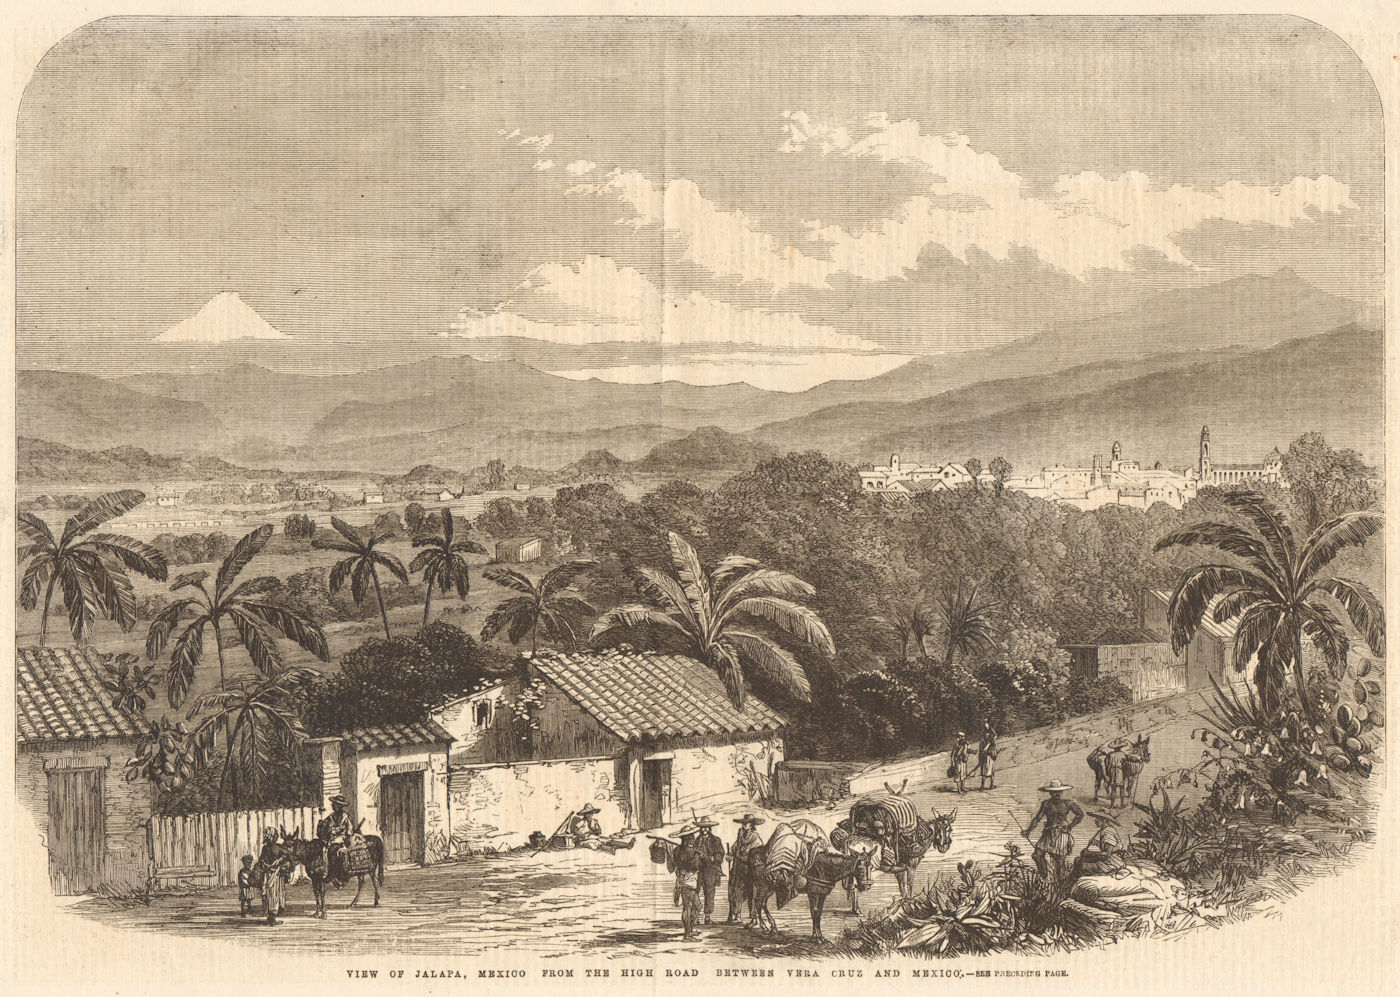 Associate Product View of Xalapa, Mexico from the high road between Veracruz & Mexico 1862